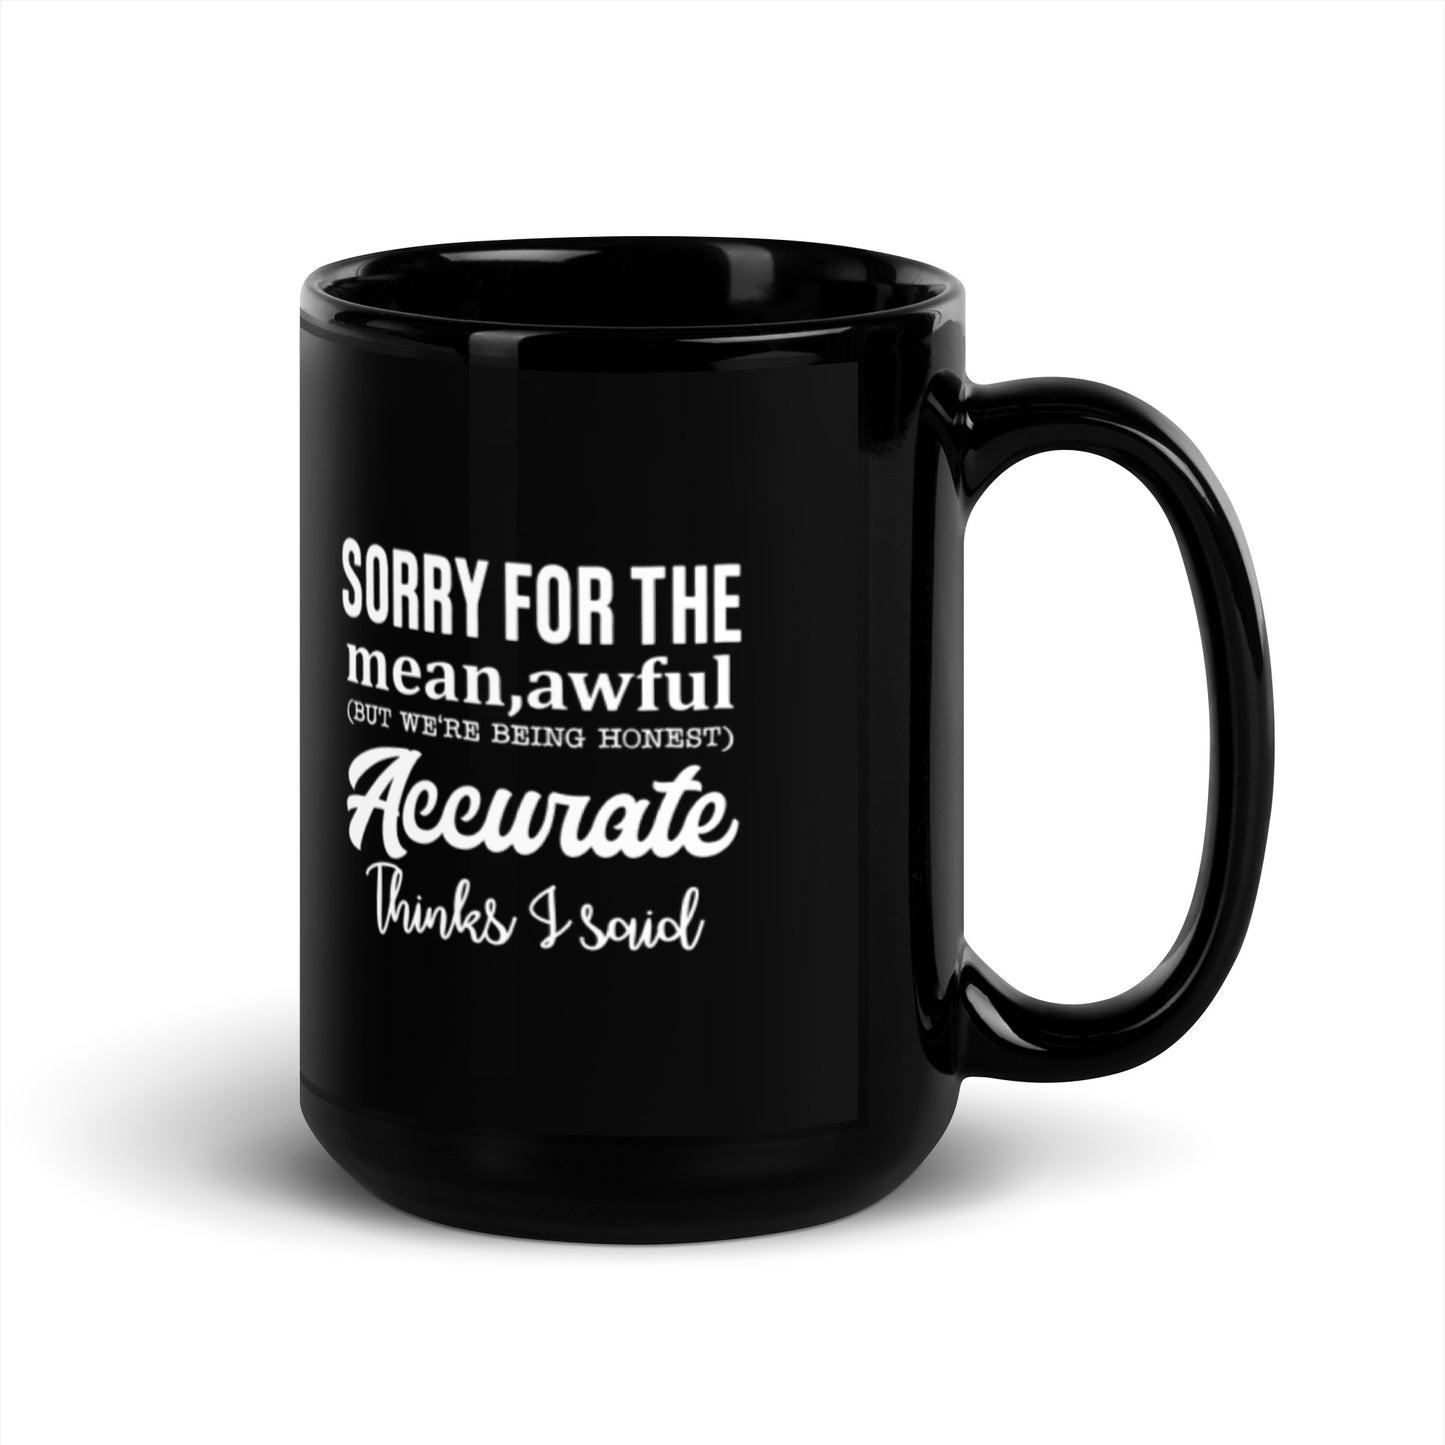 Sorry for the Mean Awful But Accurate Things I Said Black Glossy Mug